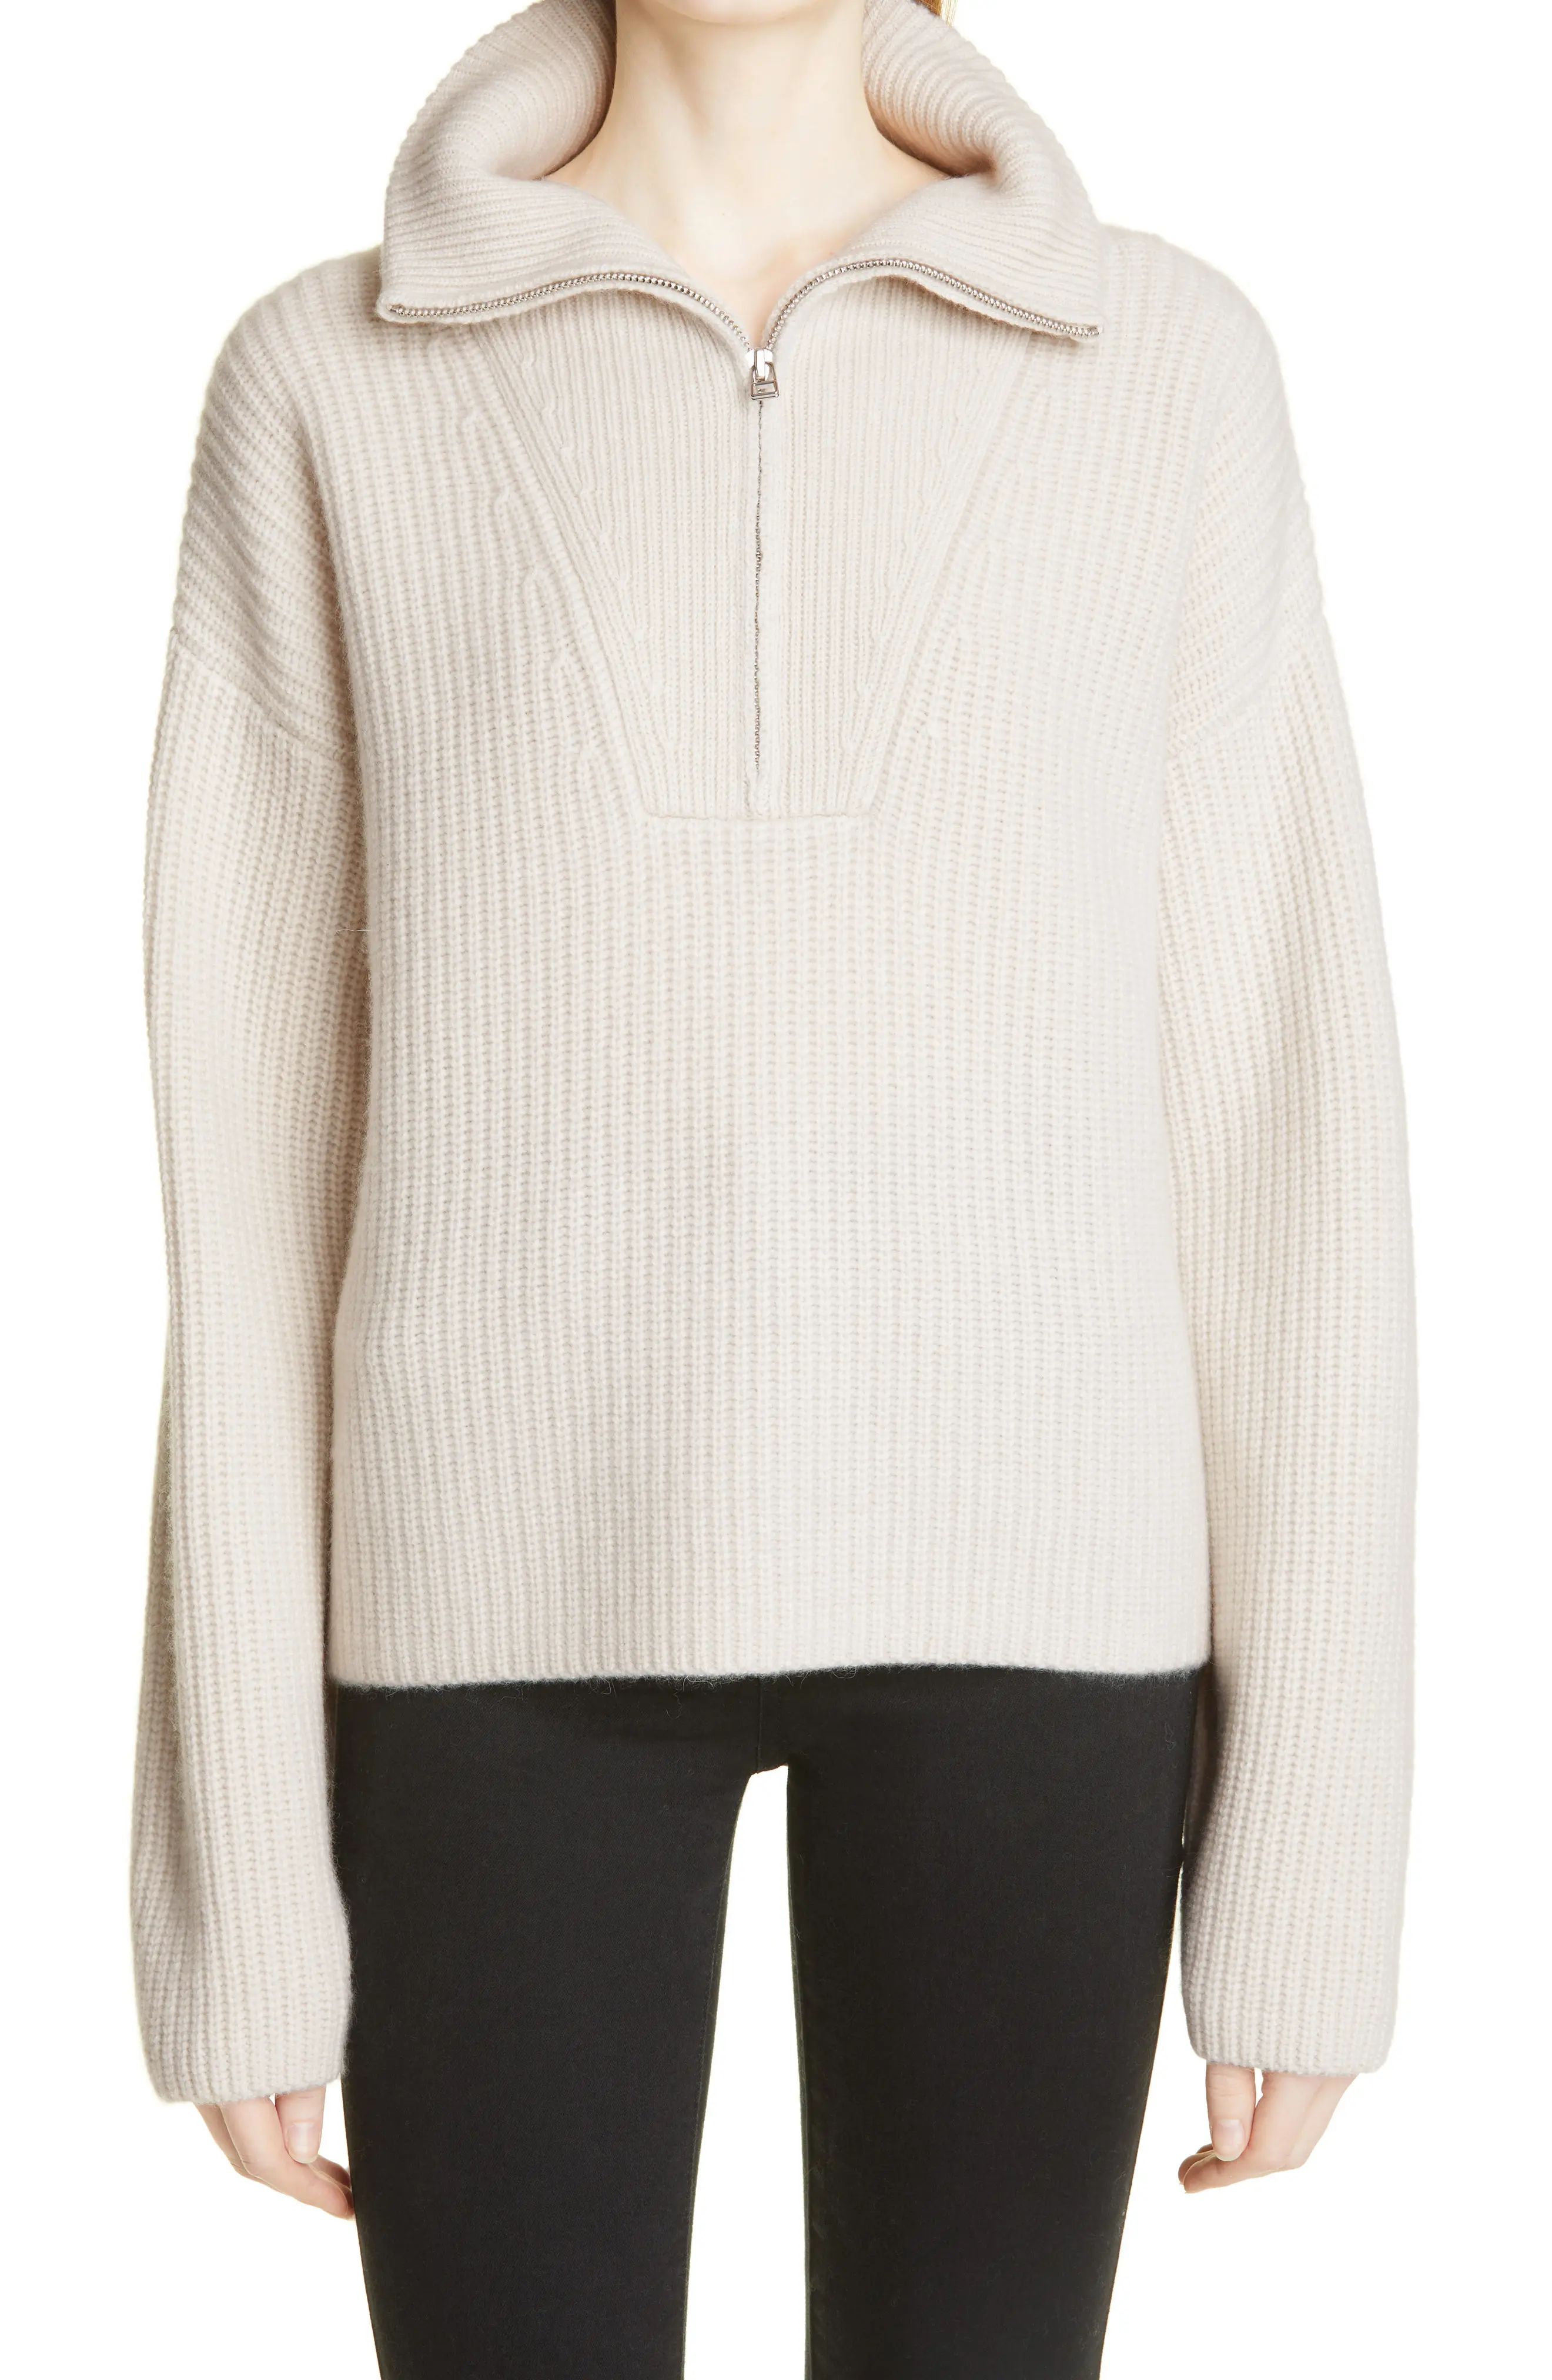 Nordstrom Signature Rib Half Zip Cashmere Sweater in Ivory Sand at Nordstrom, Size X-Small | Nordstrom